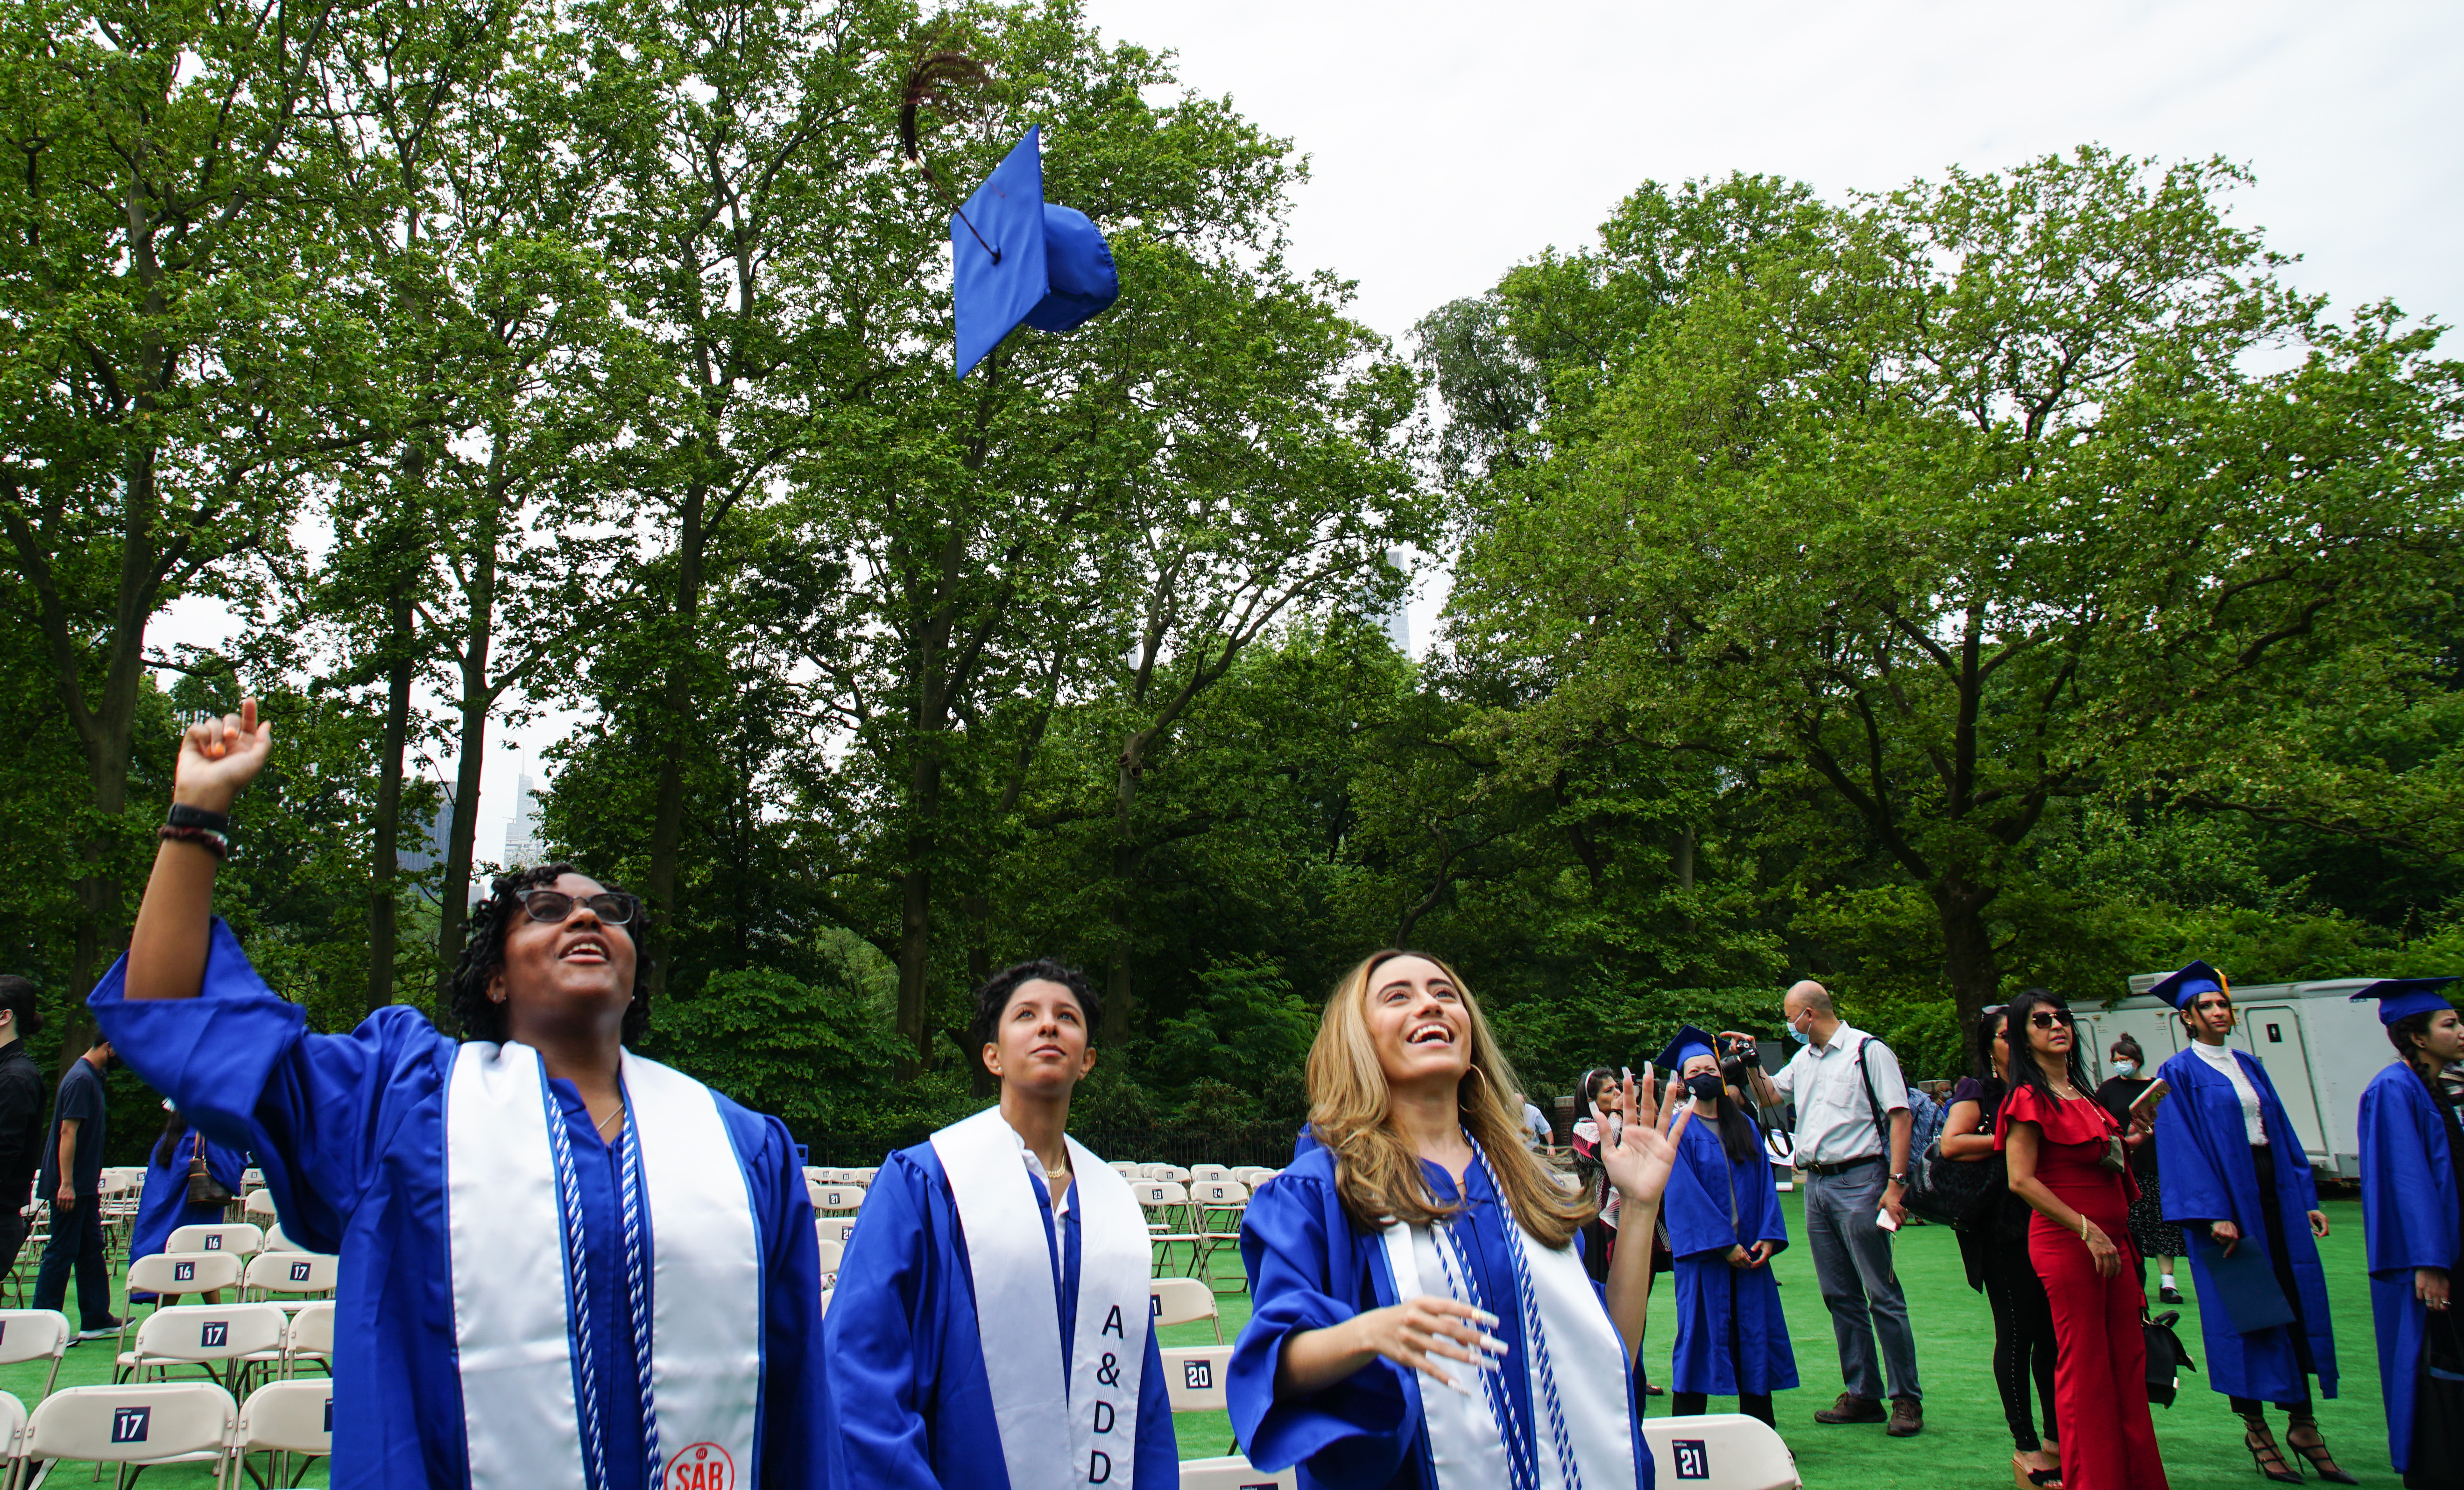 students at commencement in Central Park with mortarboard in midair 